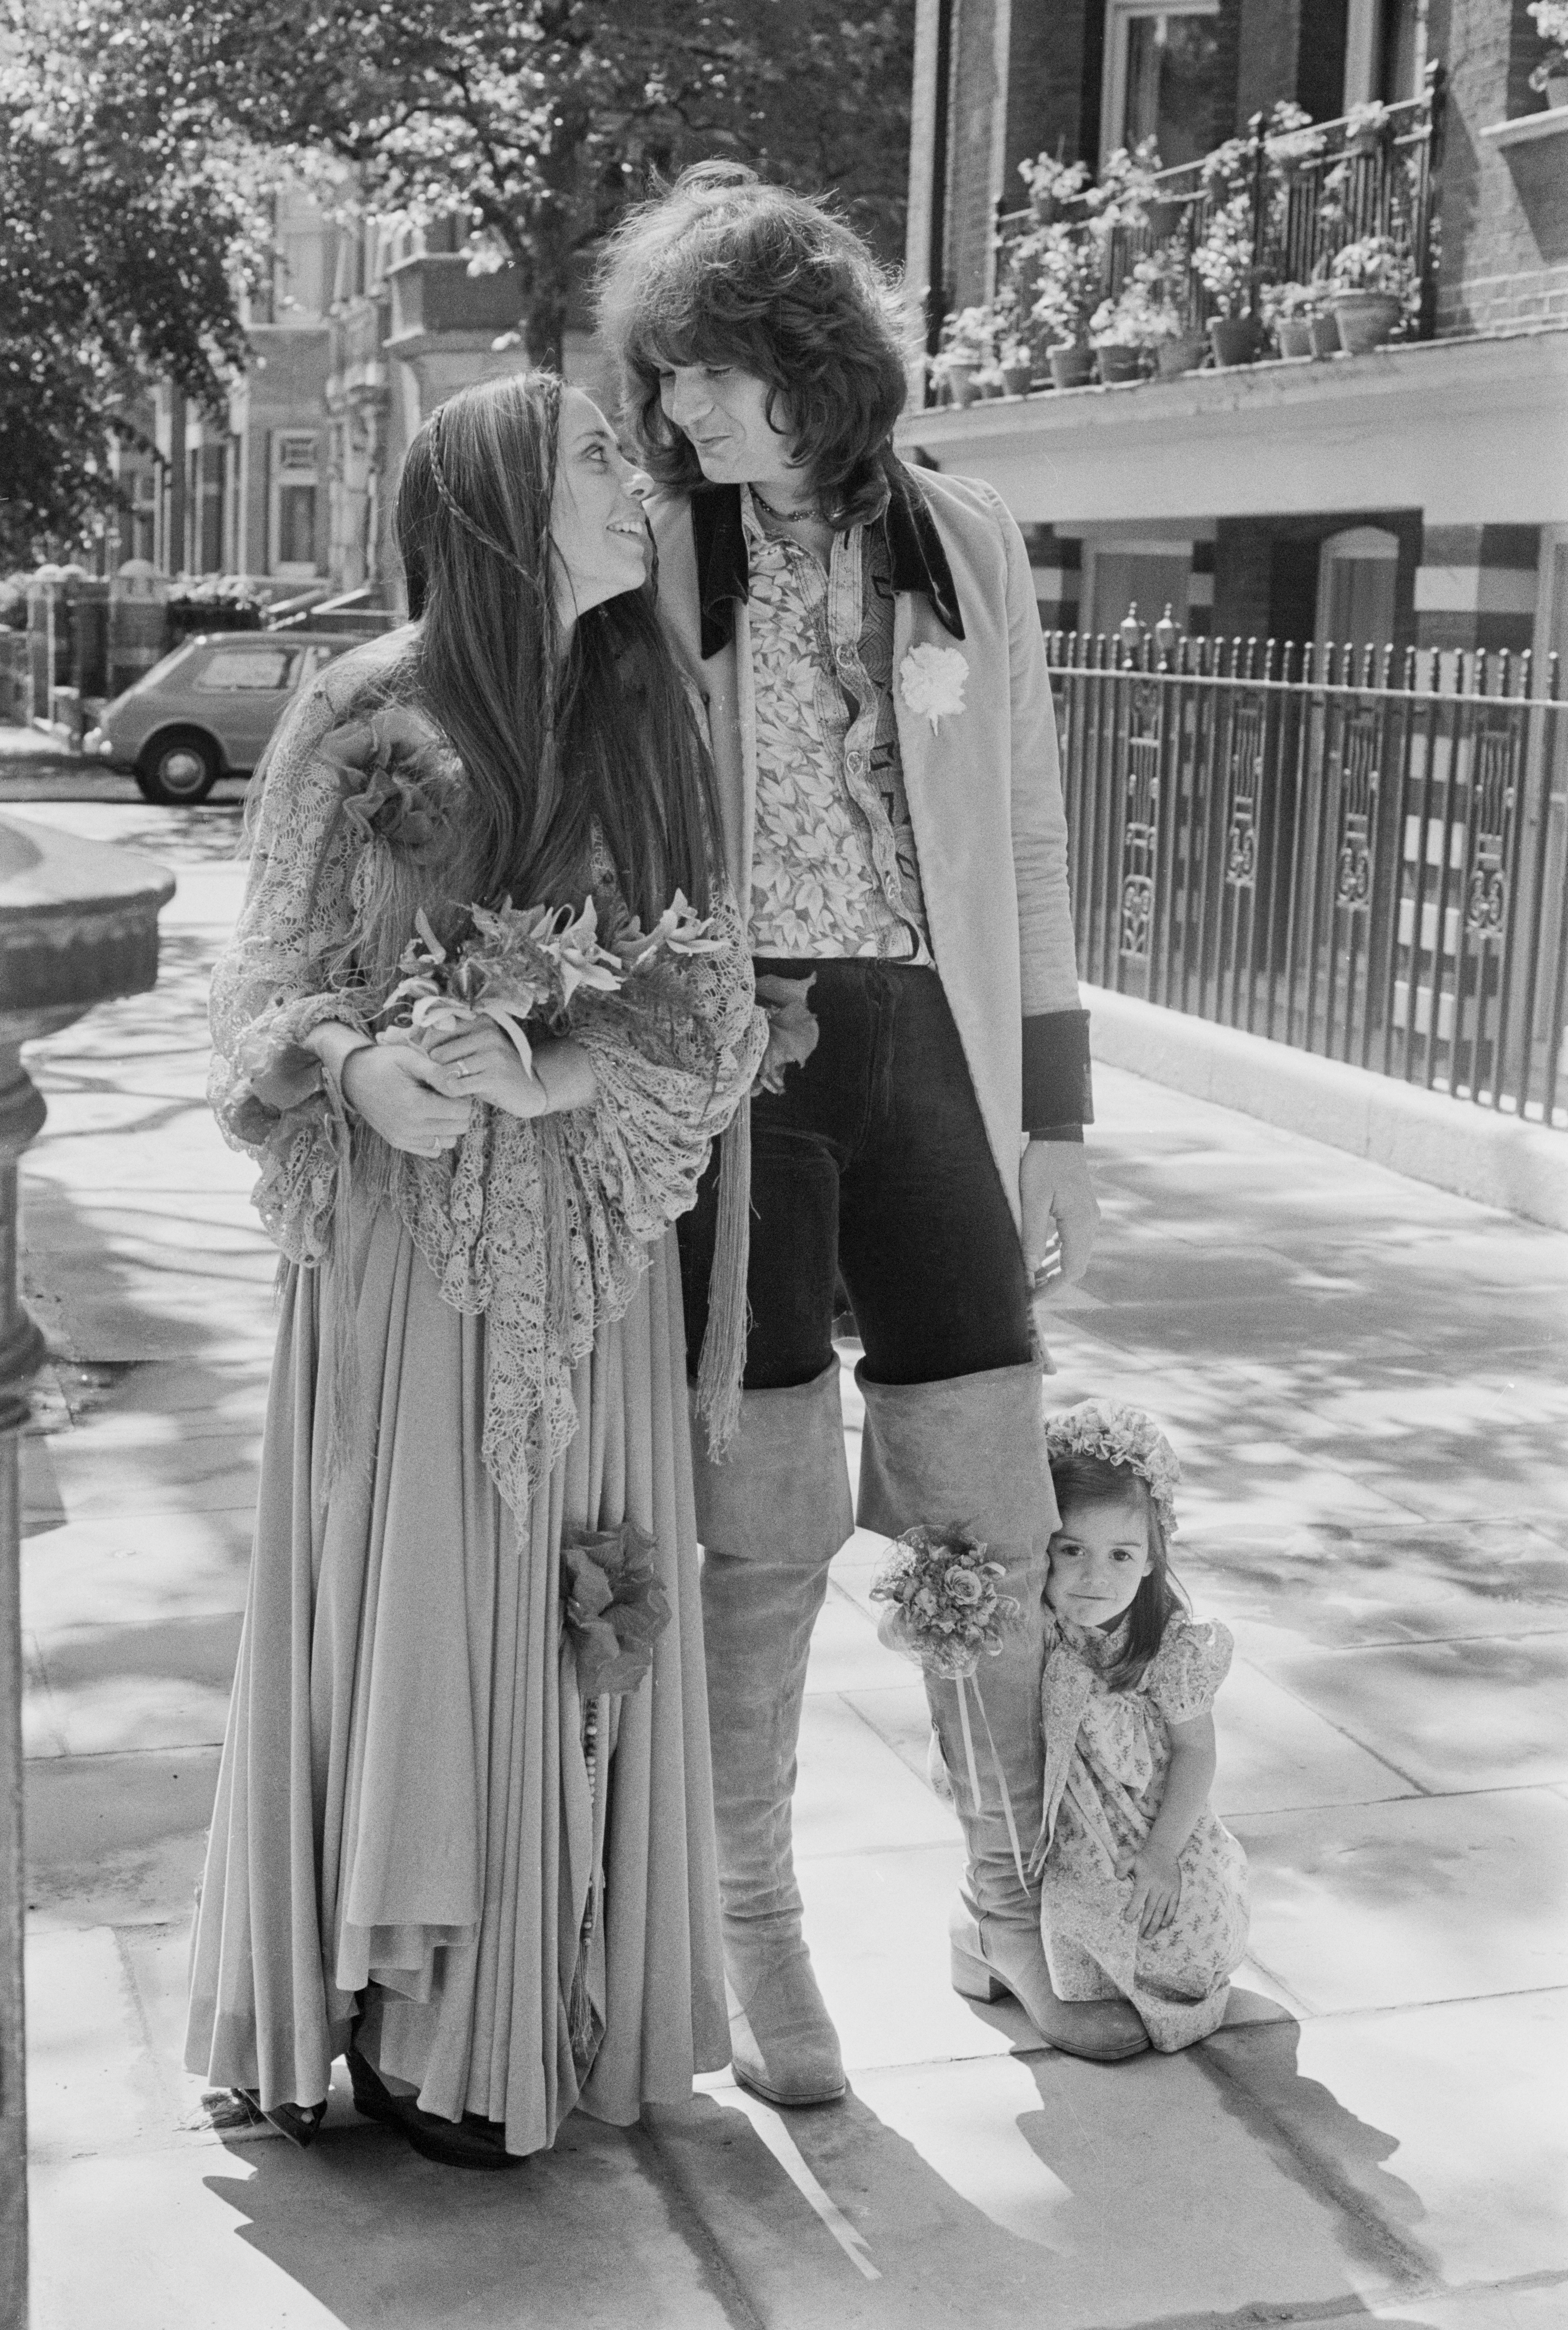 Bassist Chris Squire, of progressive rock group Yes, with model Nikki James at their wedding, June 19, 1972. On the right is James's daughter Carmen, who was one of the bridesmaids. (Getty)